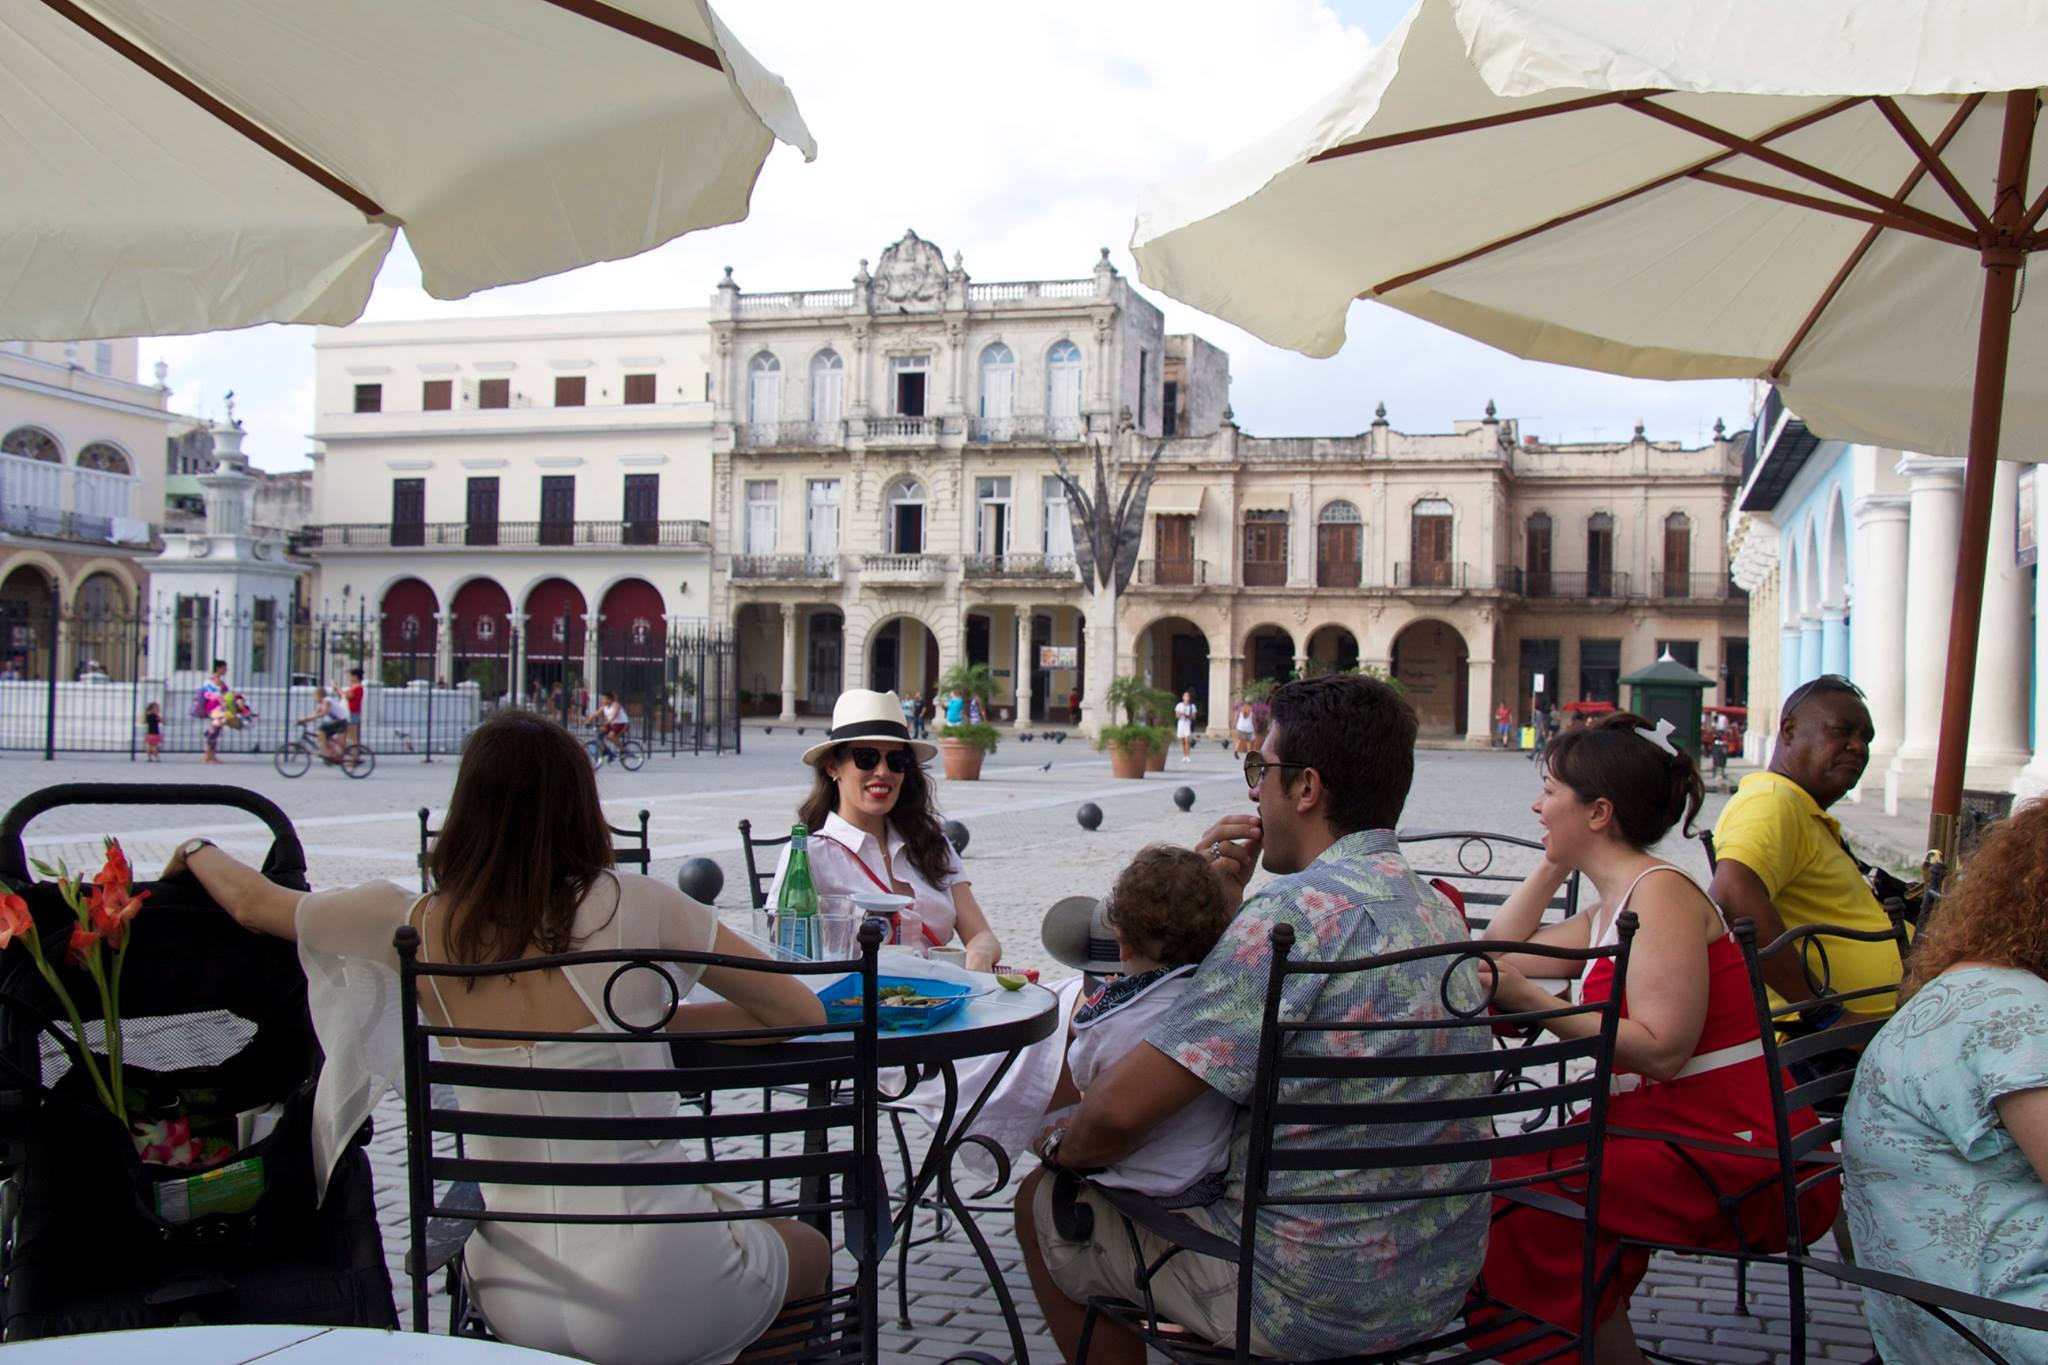   Sitting in the squares of Havana gives a view into how the architectures come together. Relaxed, open and friendly.  &nbsp;  